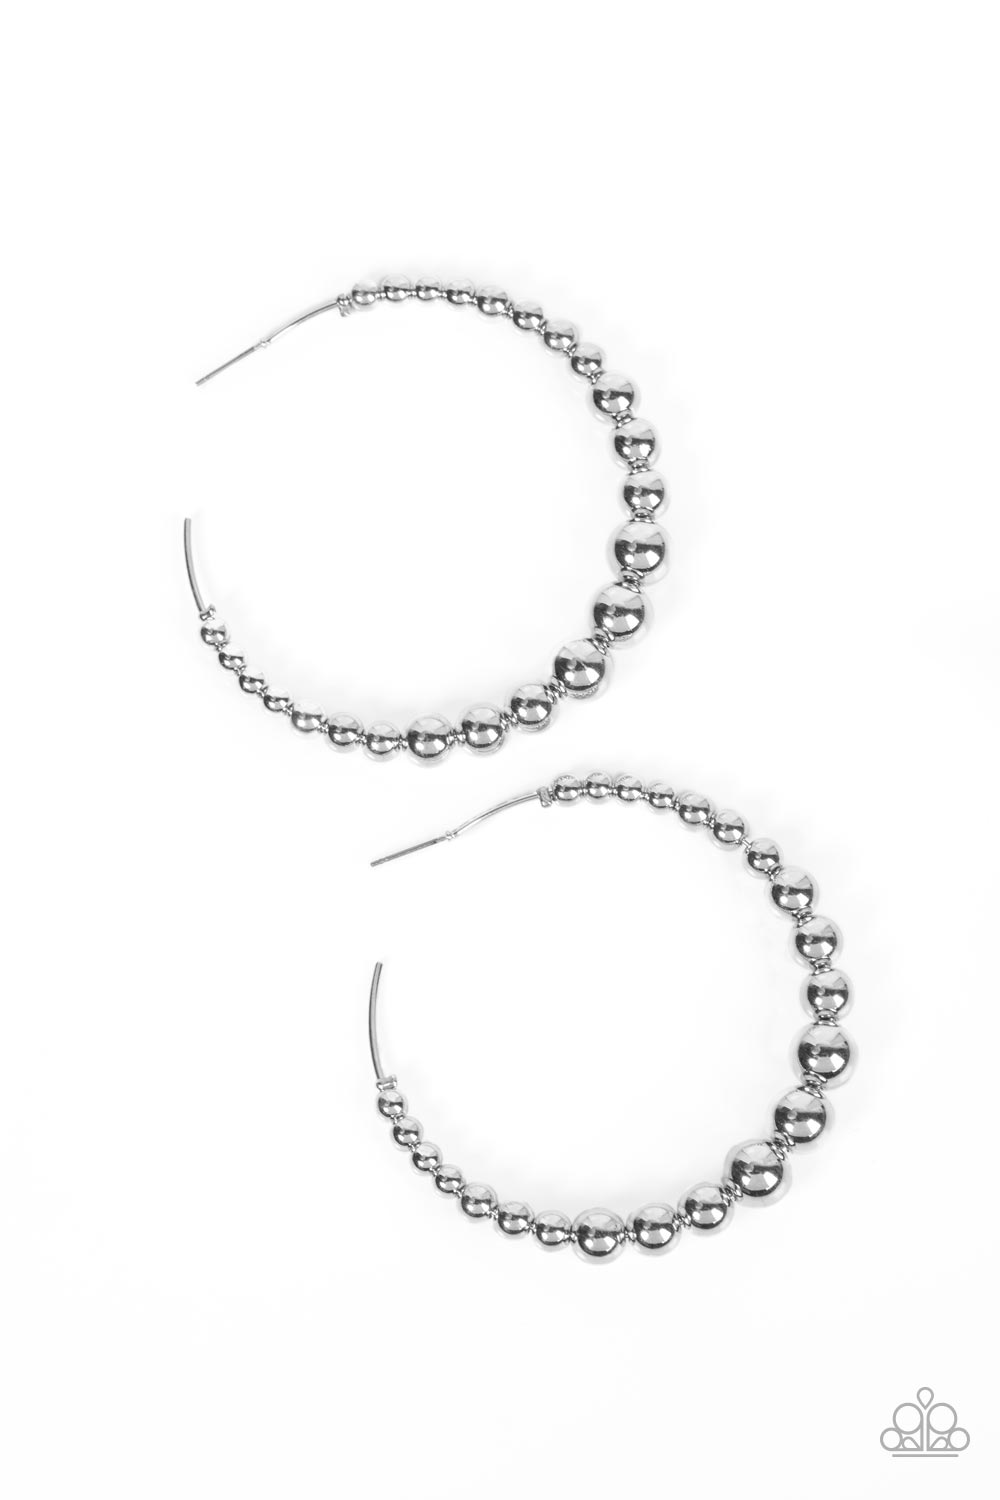 Show Off Your Curves - Silver Hoop Earrings